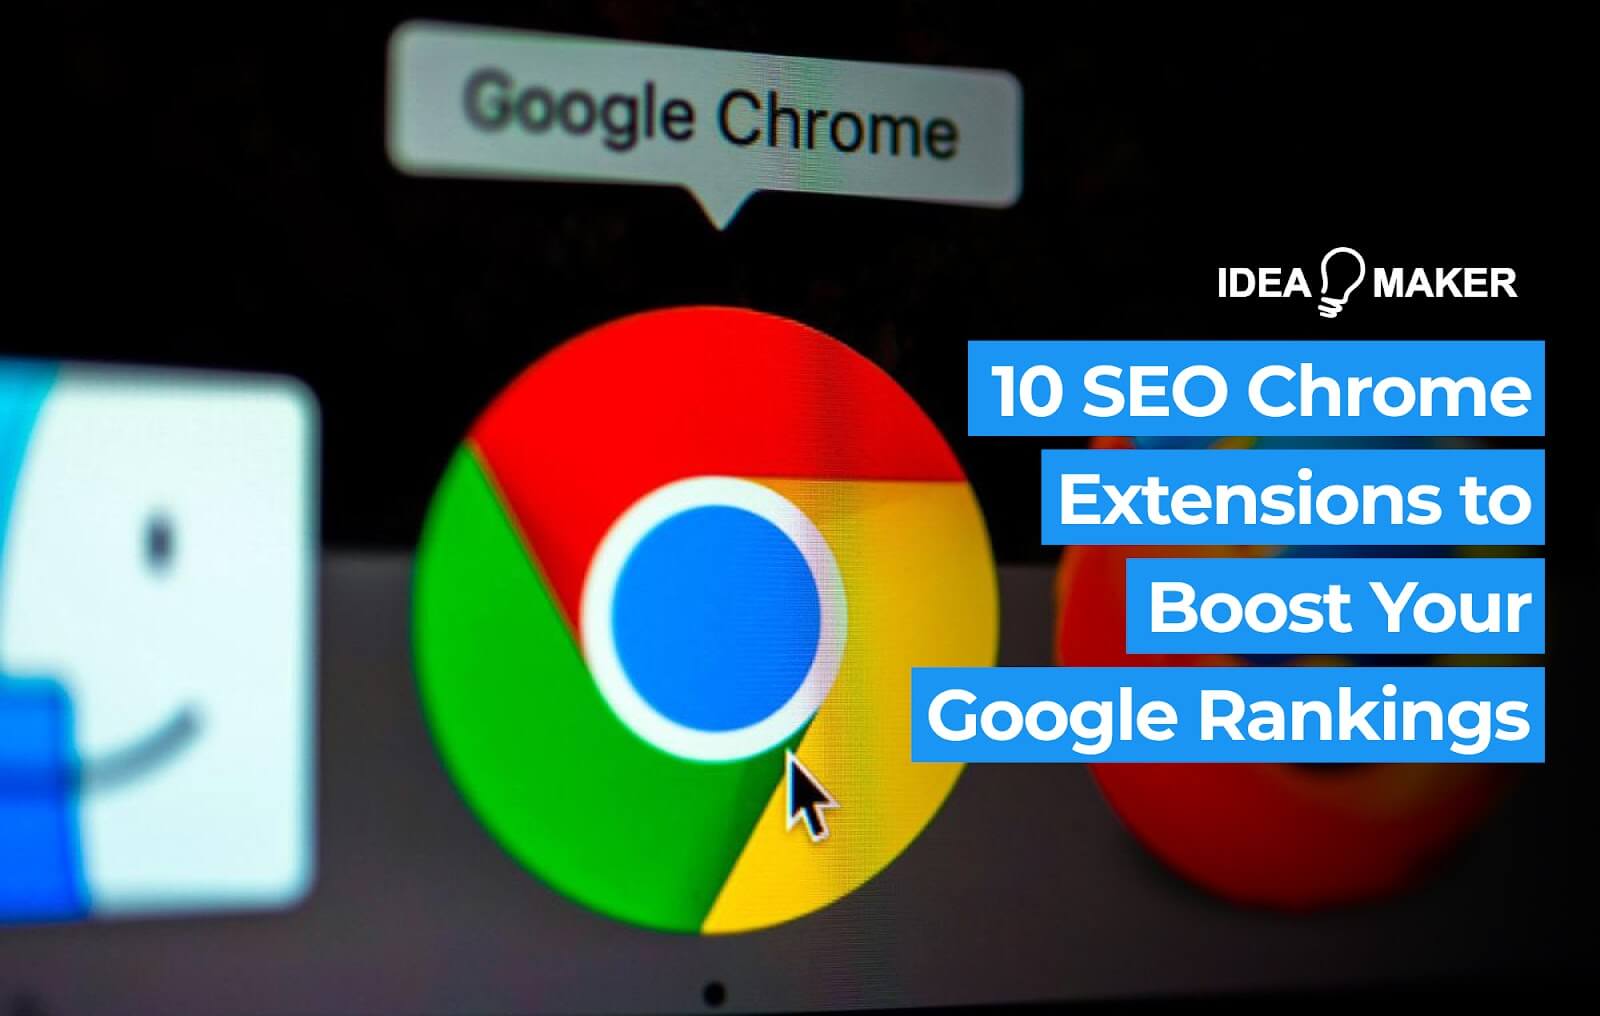 Ideamaker - 10 SEO Chrome Extensions to Boost Your Google Rankings